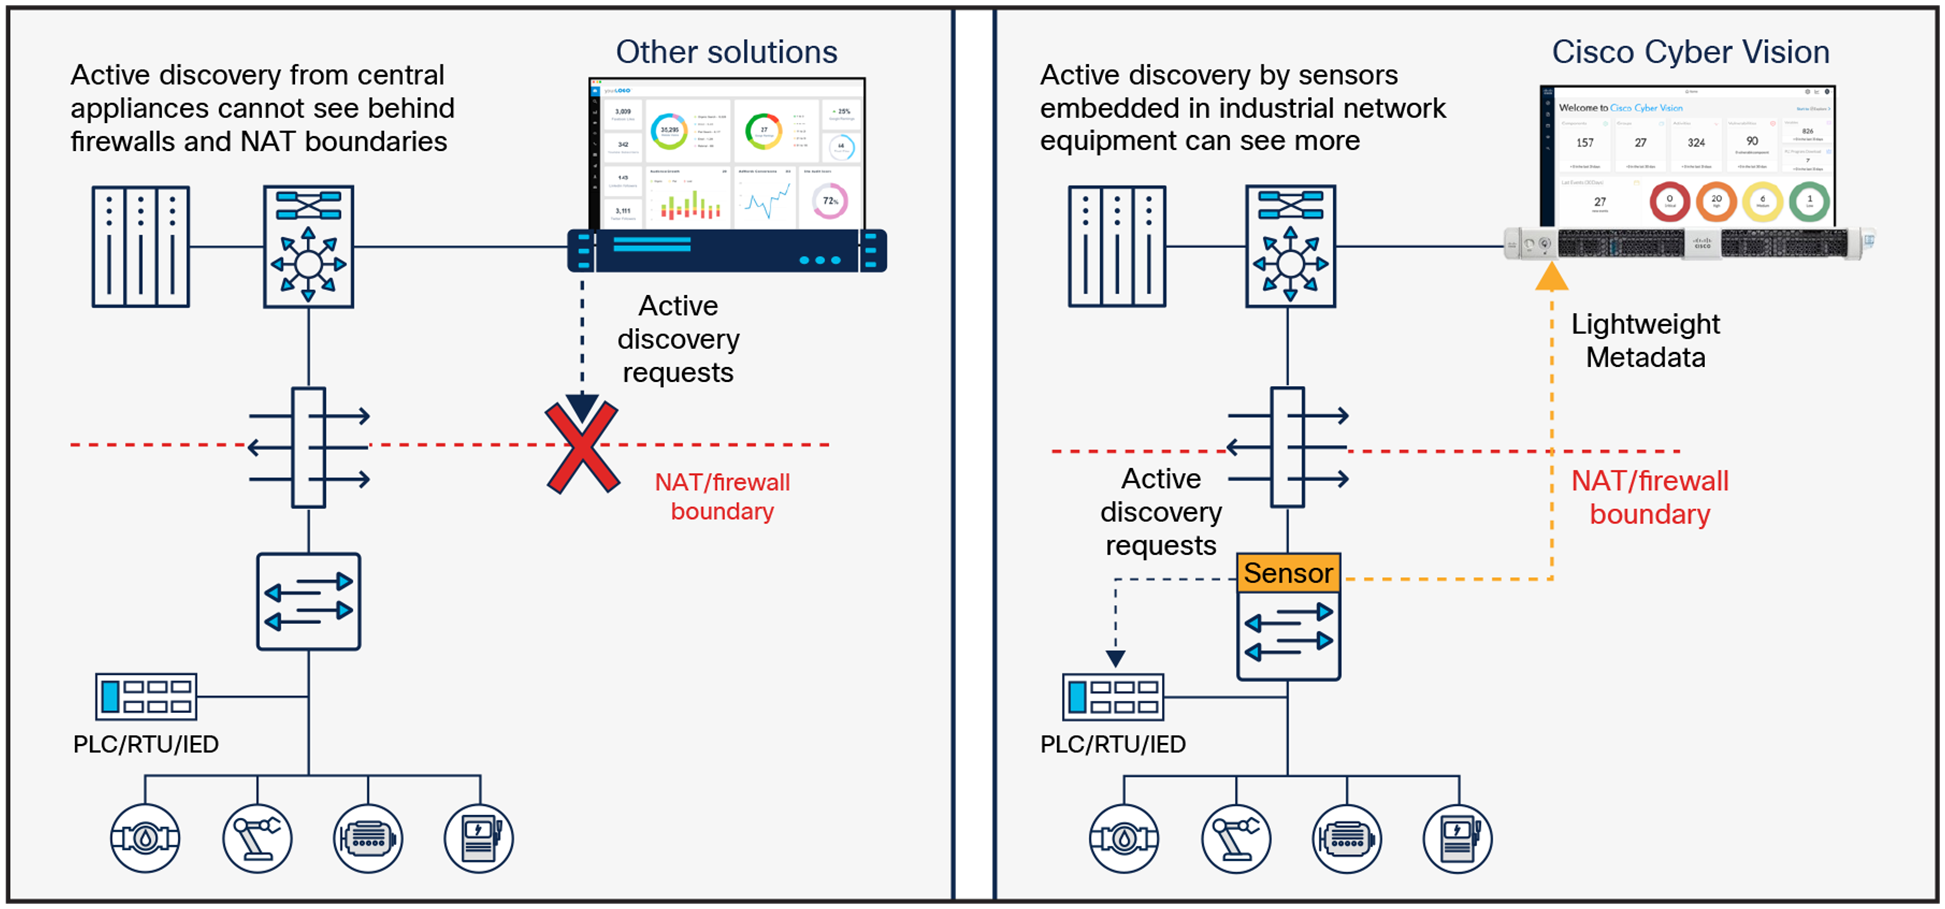 Active discovery requests sent by Cisco Cyber Vision sensors are not blocked by NAT boundaries and can reach 100% of industrial devices